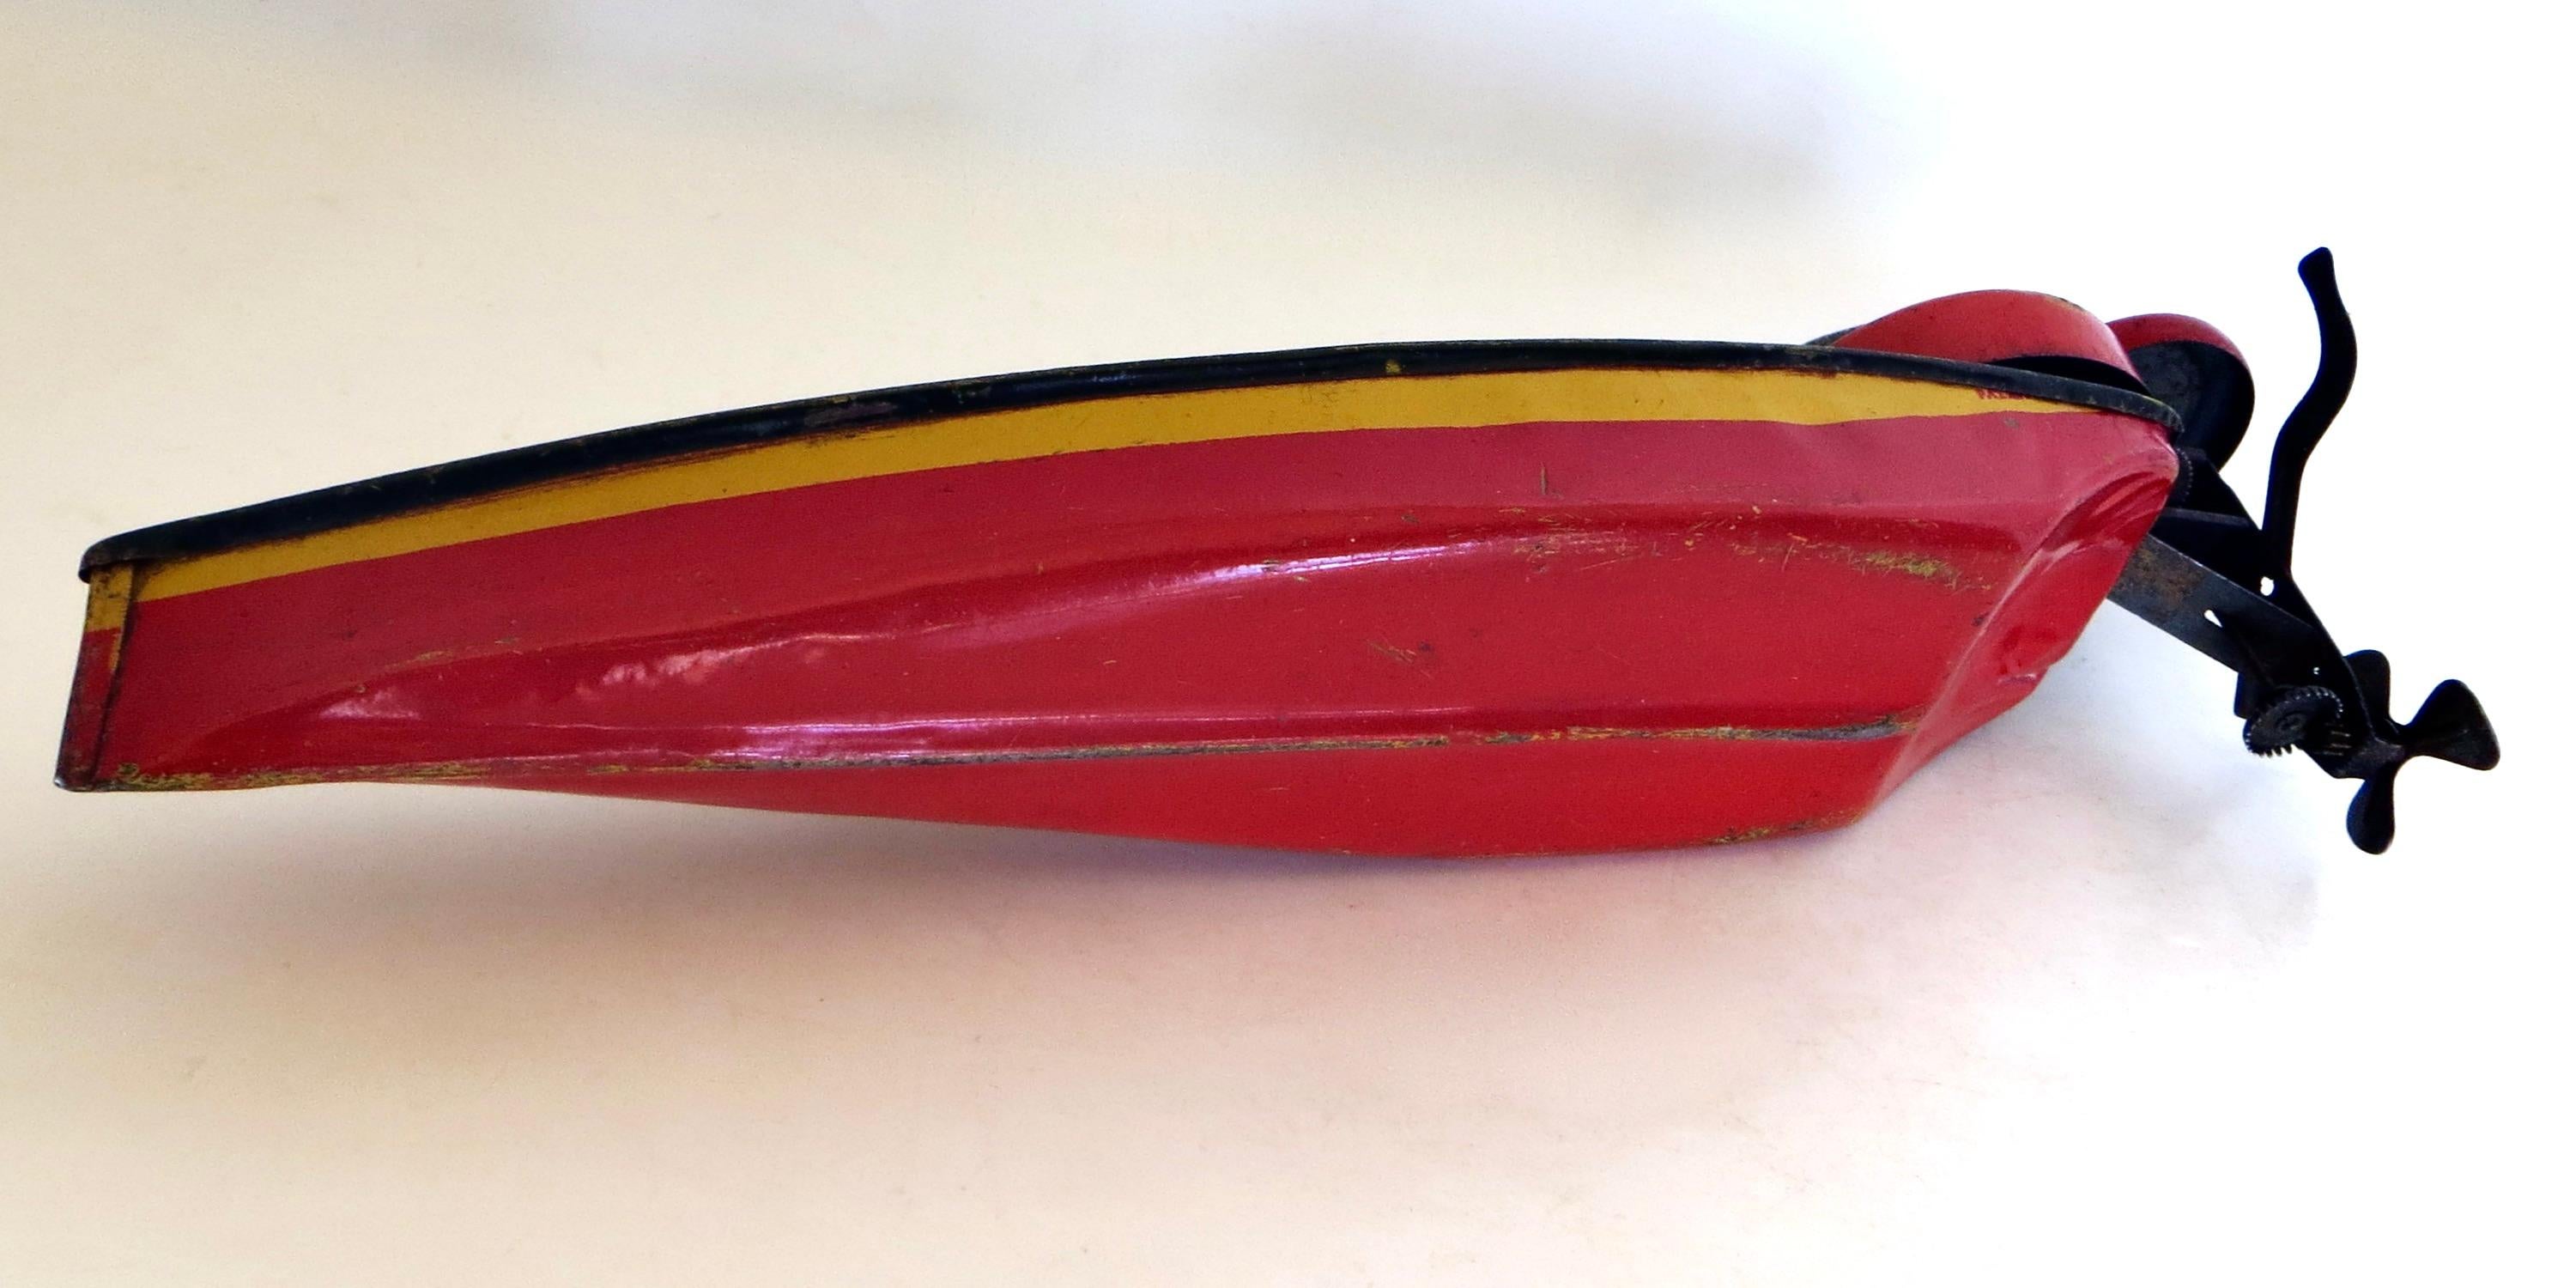 Mid-20th Century Vintage Toy Wind-Up Speed Boat with Driver by Lindstrom Toy Co., American 1933 For Sale